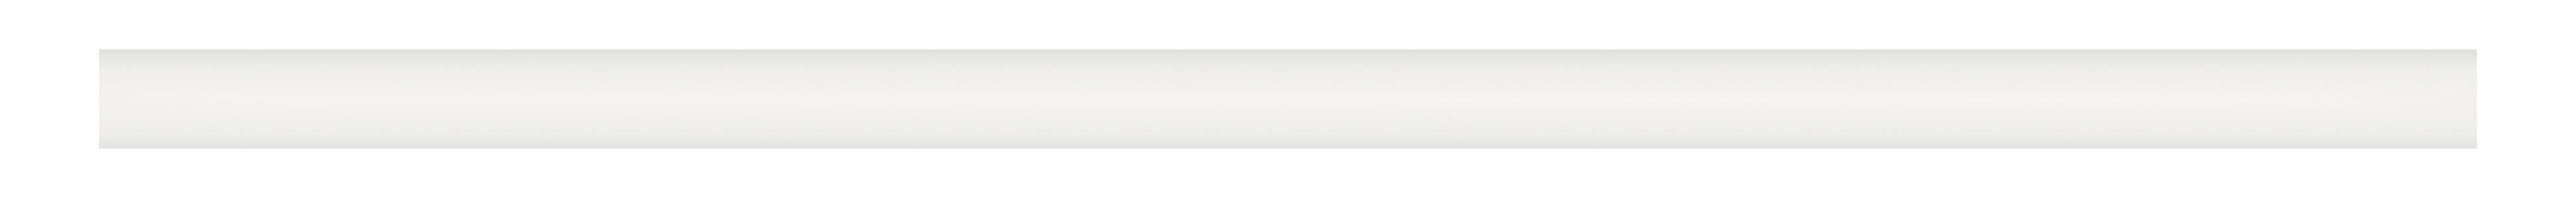 canvas white pattern glazed ceramic quarter round molding from soho anatolia collection distributed by surface group international matte finish pressed edge 12-inch bar shape